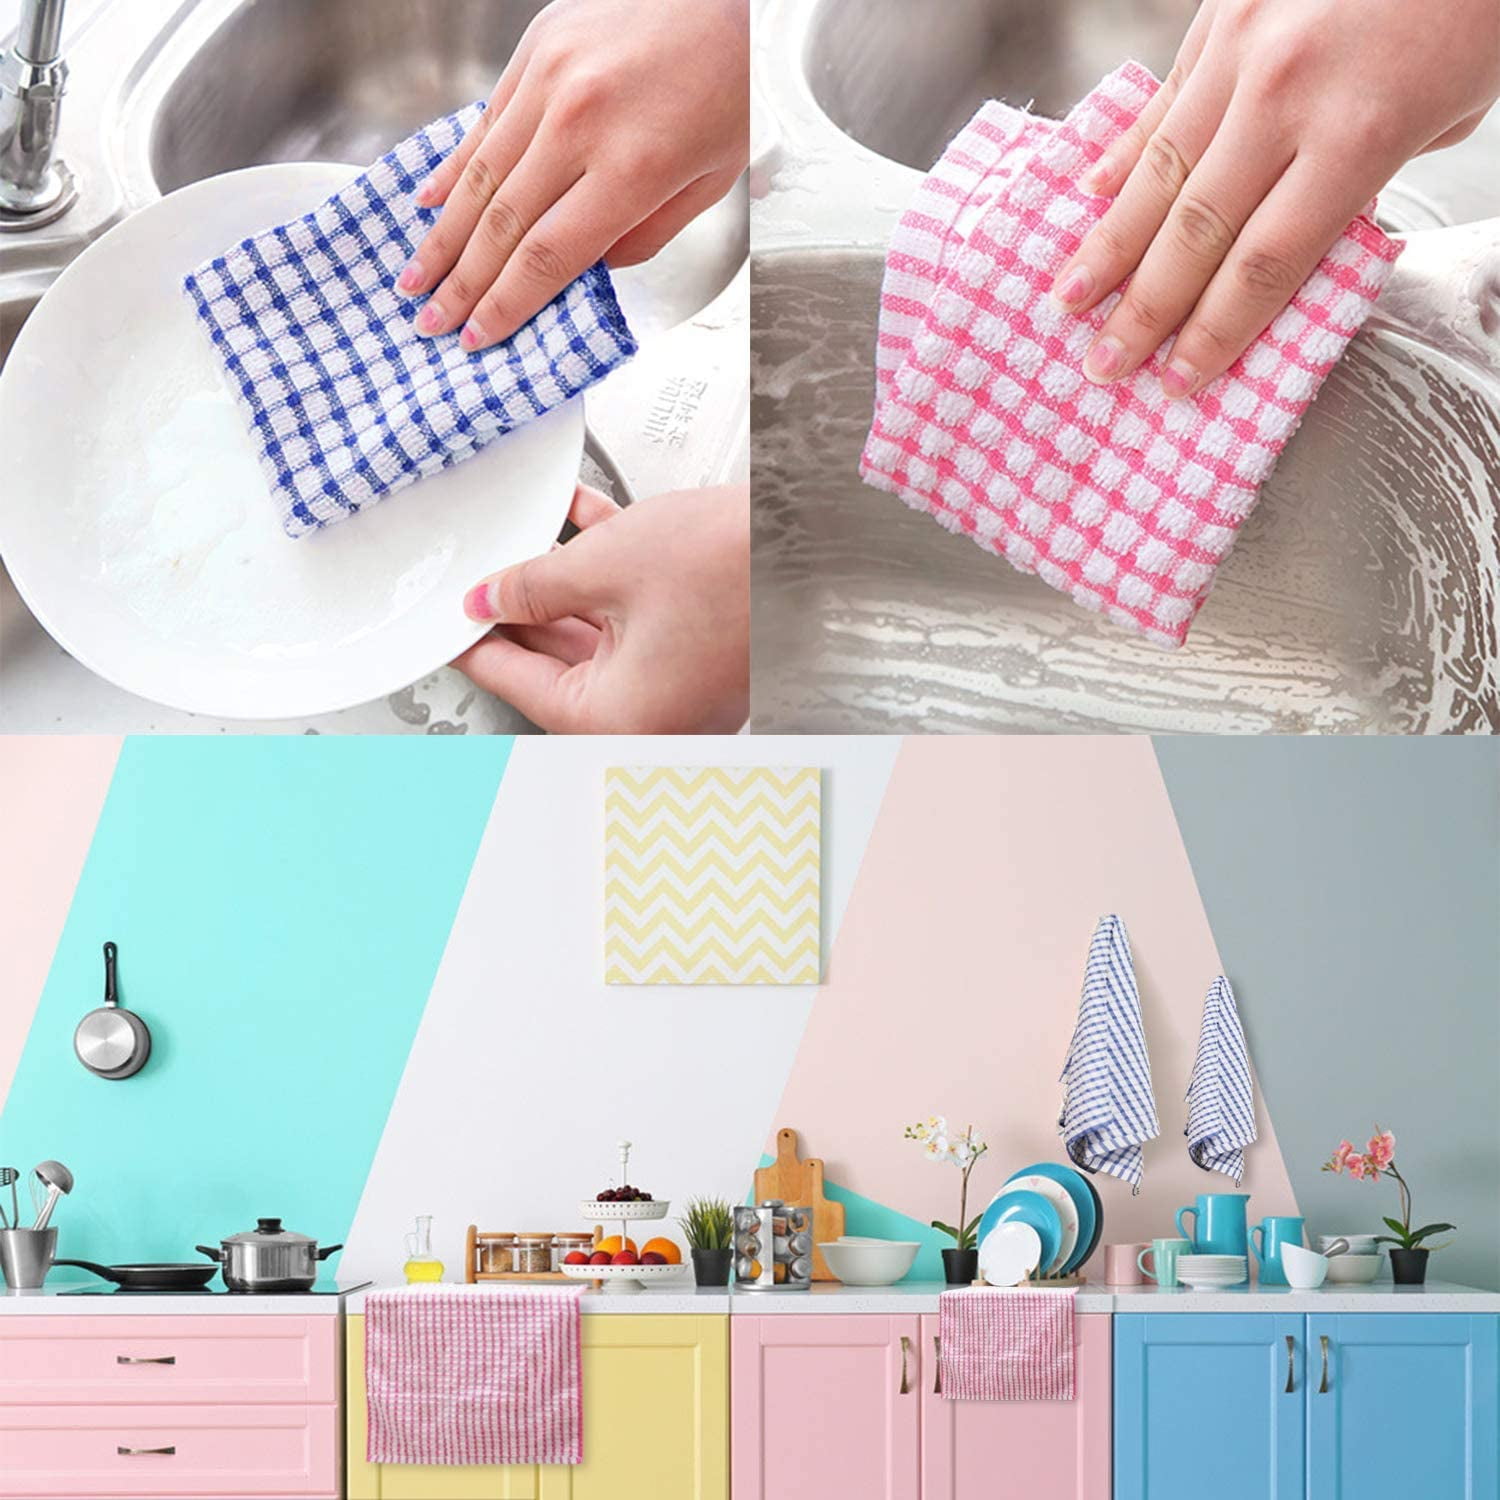 Kitchen Dish Towels, 16 Inch X 25 Inch Bulk Cotton Kitchen Towels And Dishcloths  Set, 6 Pack Dish Cloths For Washing Dishes - Handkerchief Towels -  AliExpress